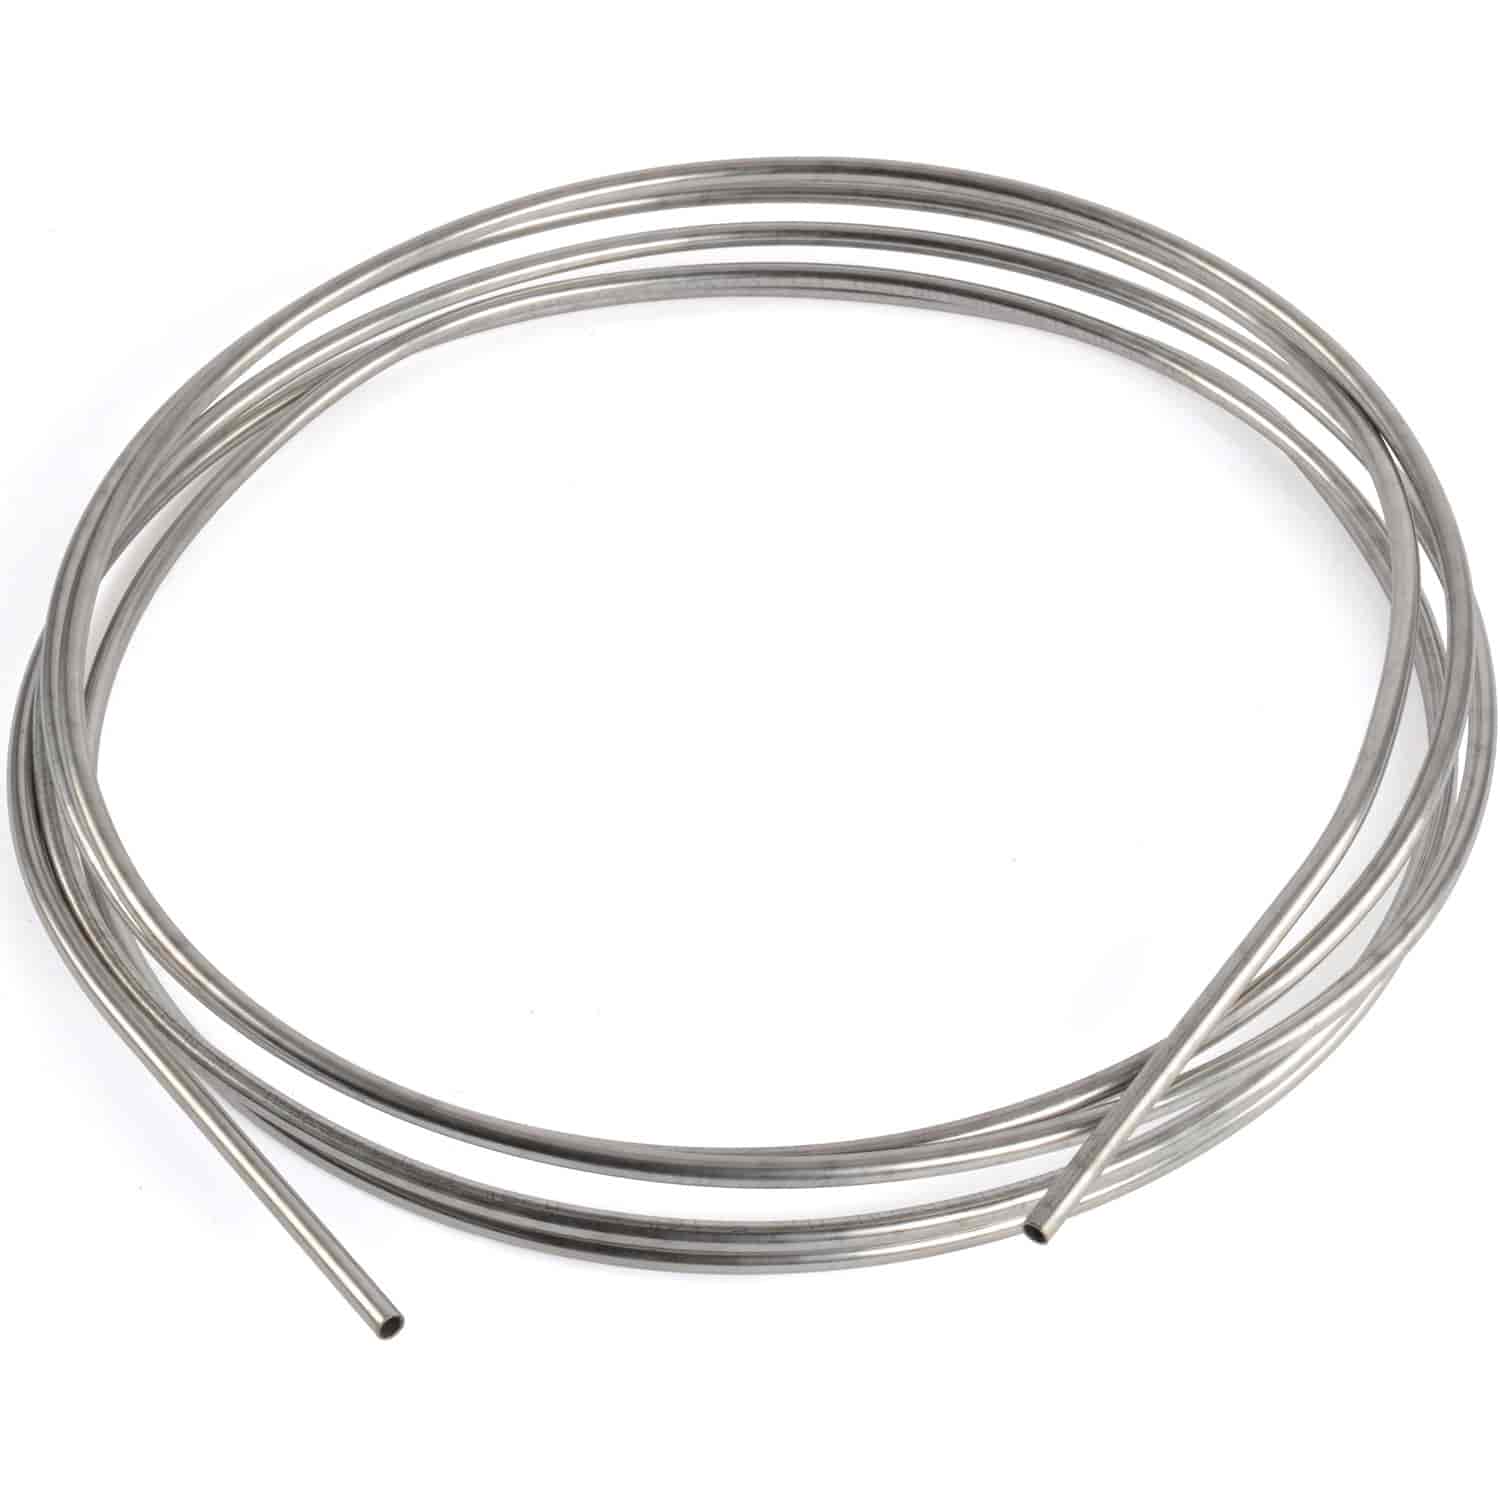 JEGS 635202 Stainless Steel Fuel Line Coil 5/16 in. O.D. x .028 in. Wall Tubing